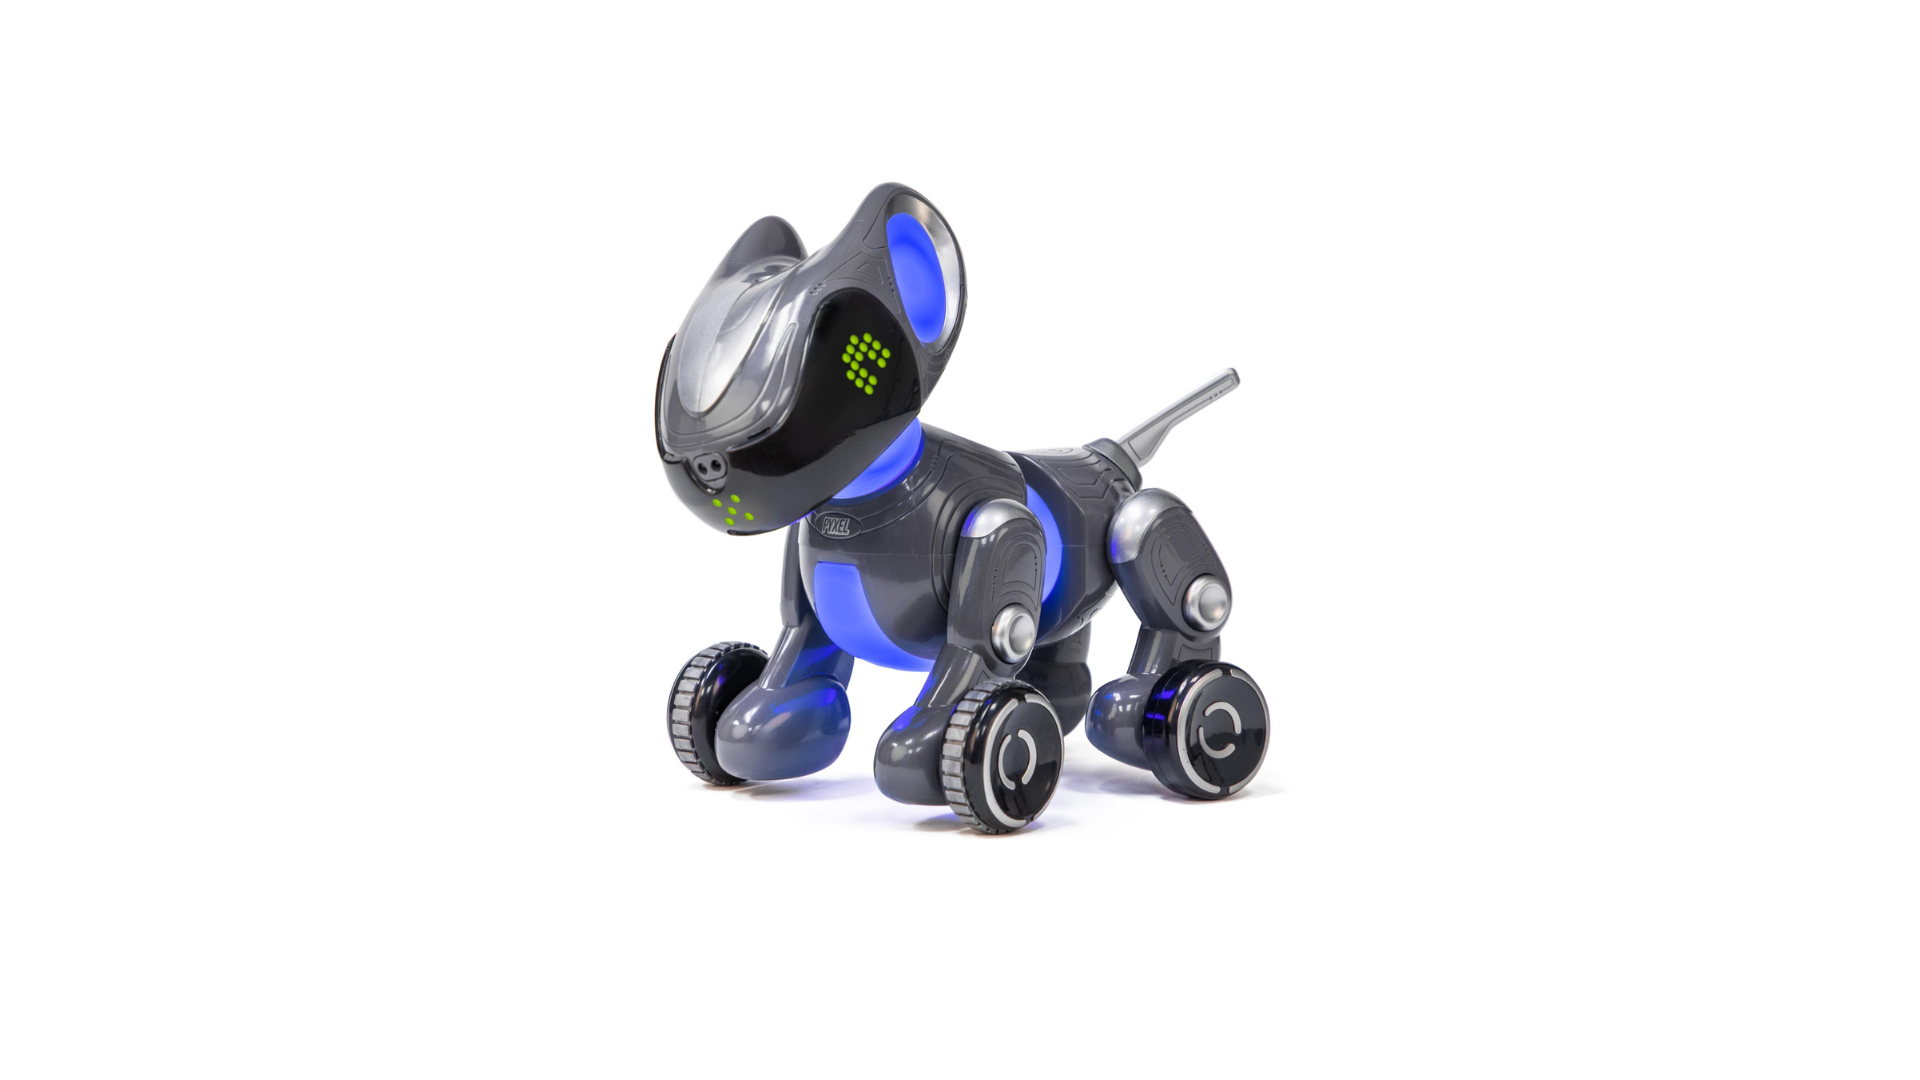 PYXEL A Coder's Best Friend - Coding Robots for Kids with Blockly